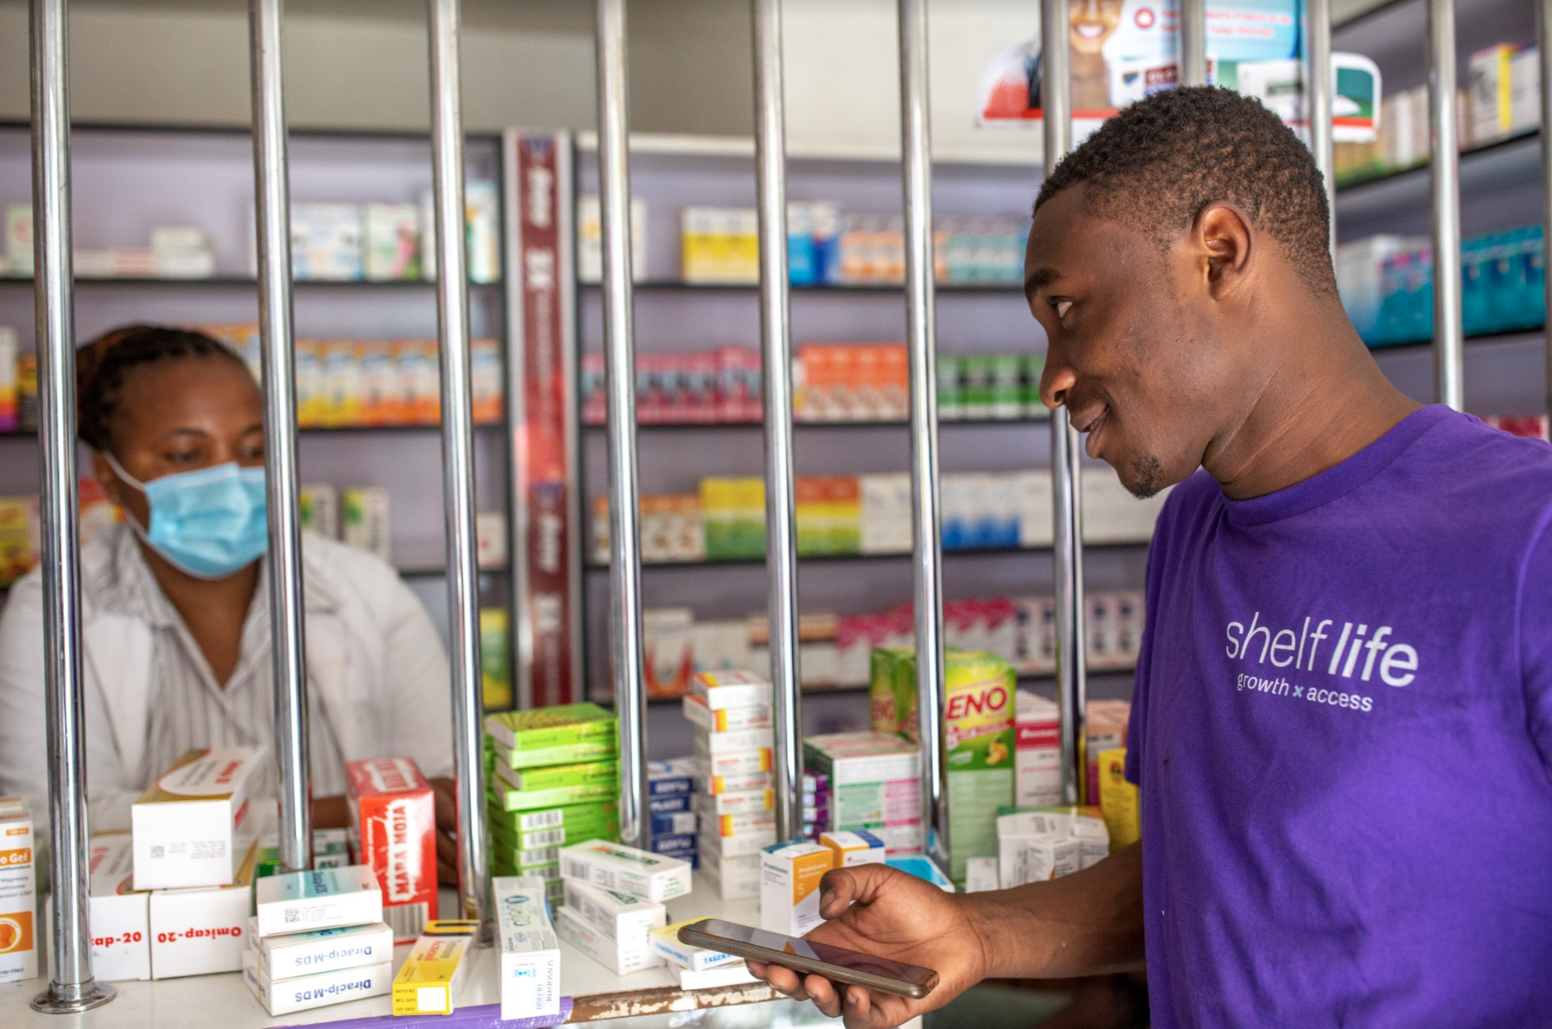 Field Intelligence targets 11 African cities to expand its pharmacy inventory-management service